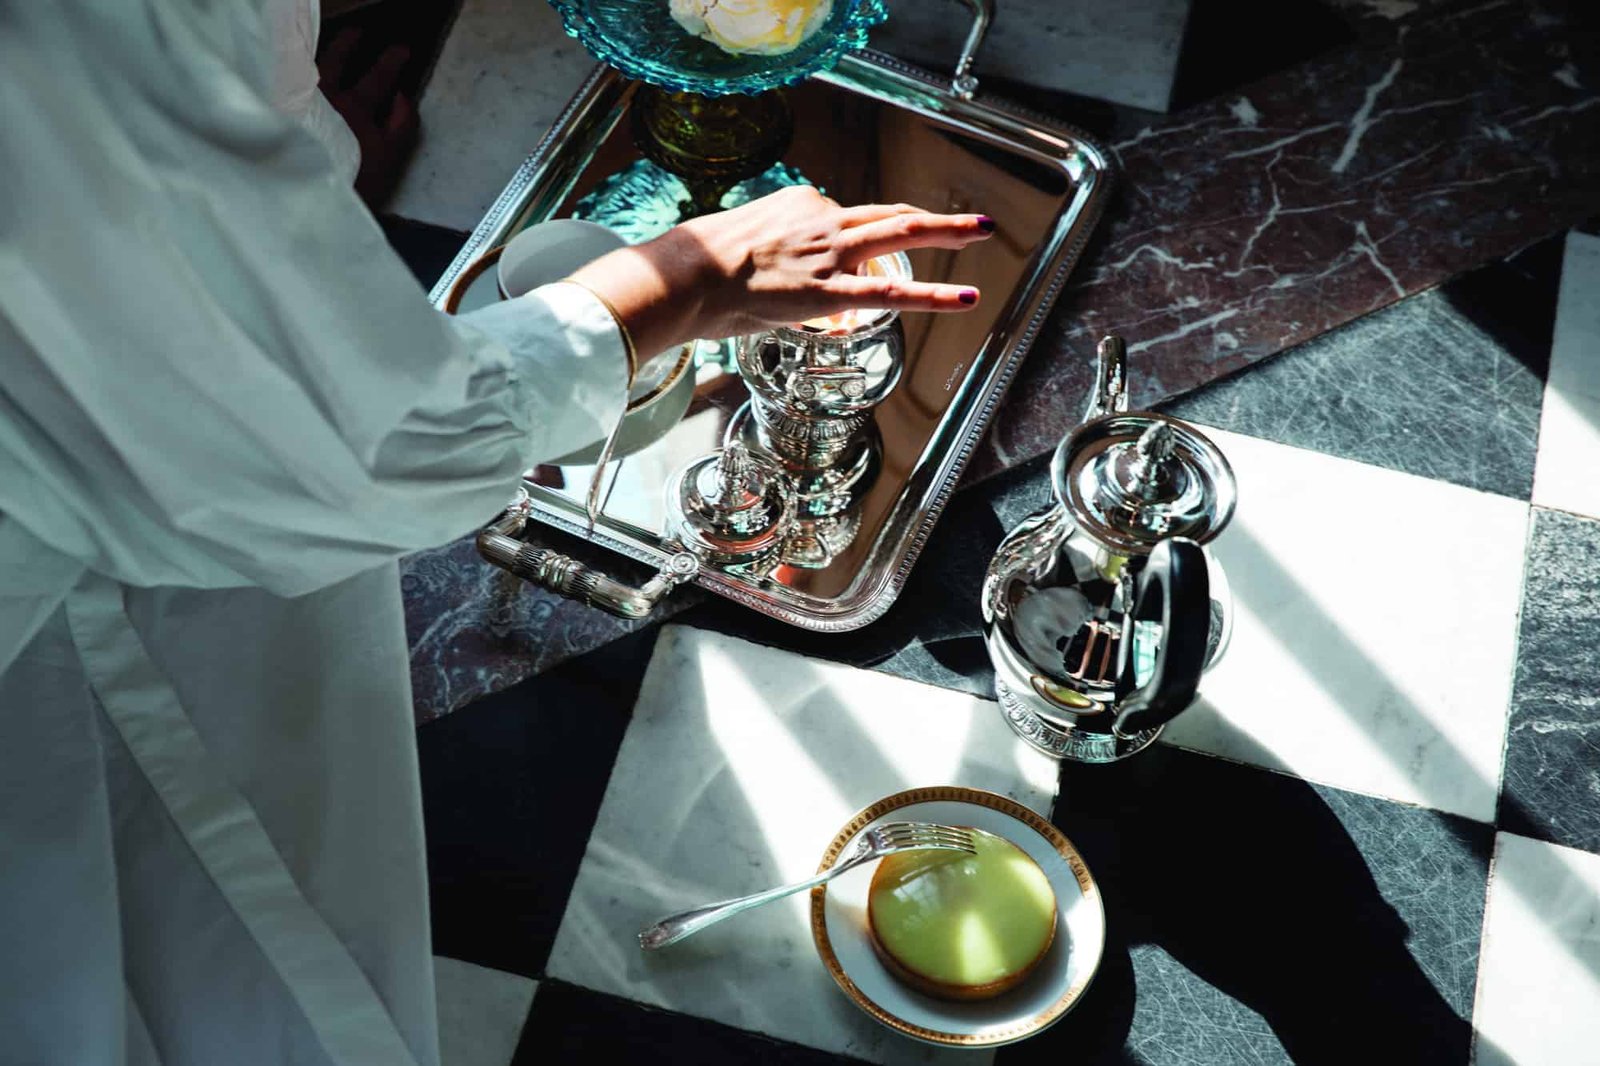 An artistically dressed woman gracefully holds a tray on a table.